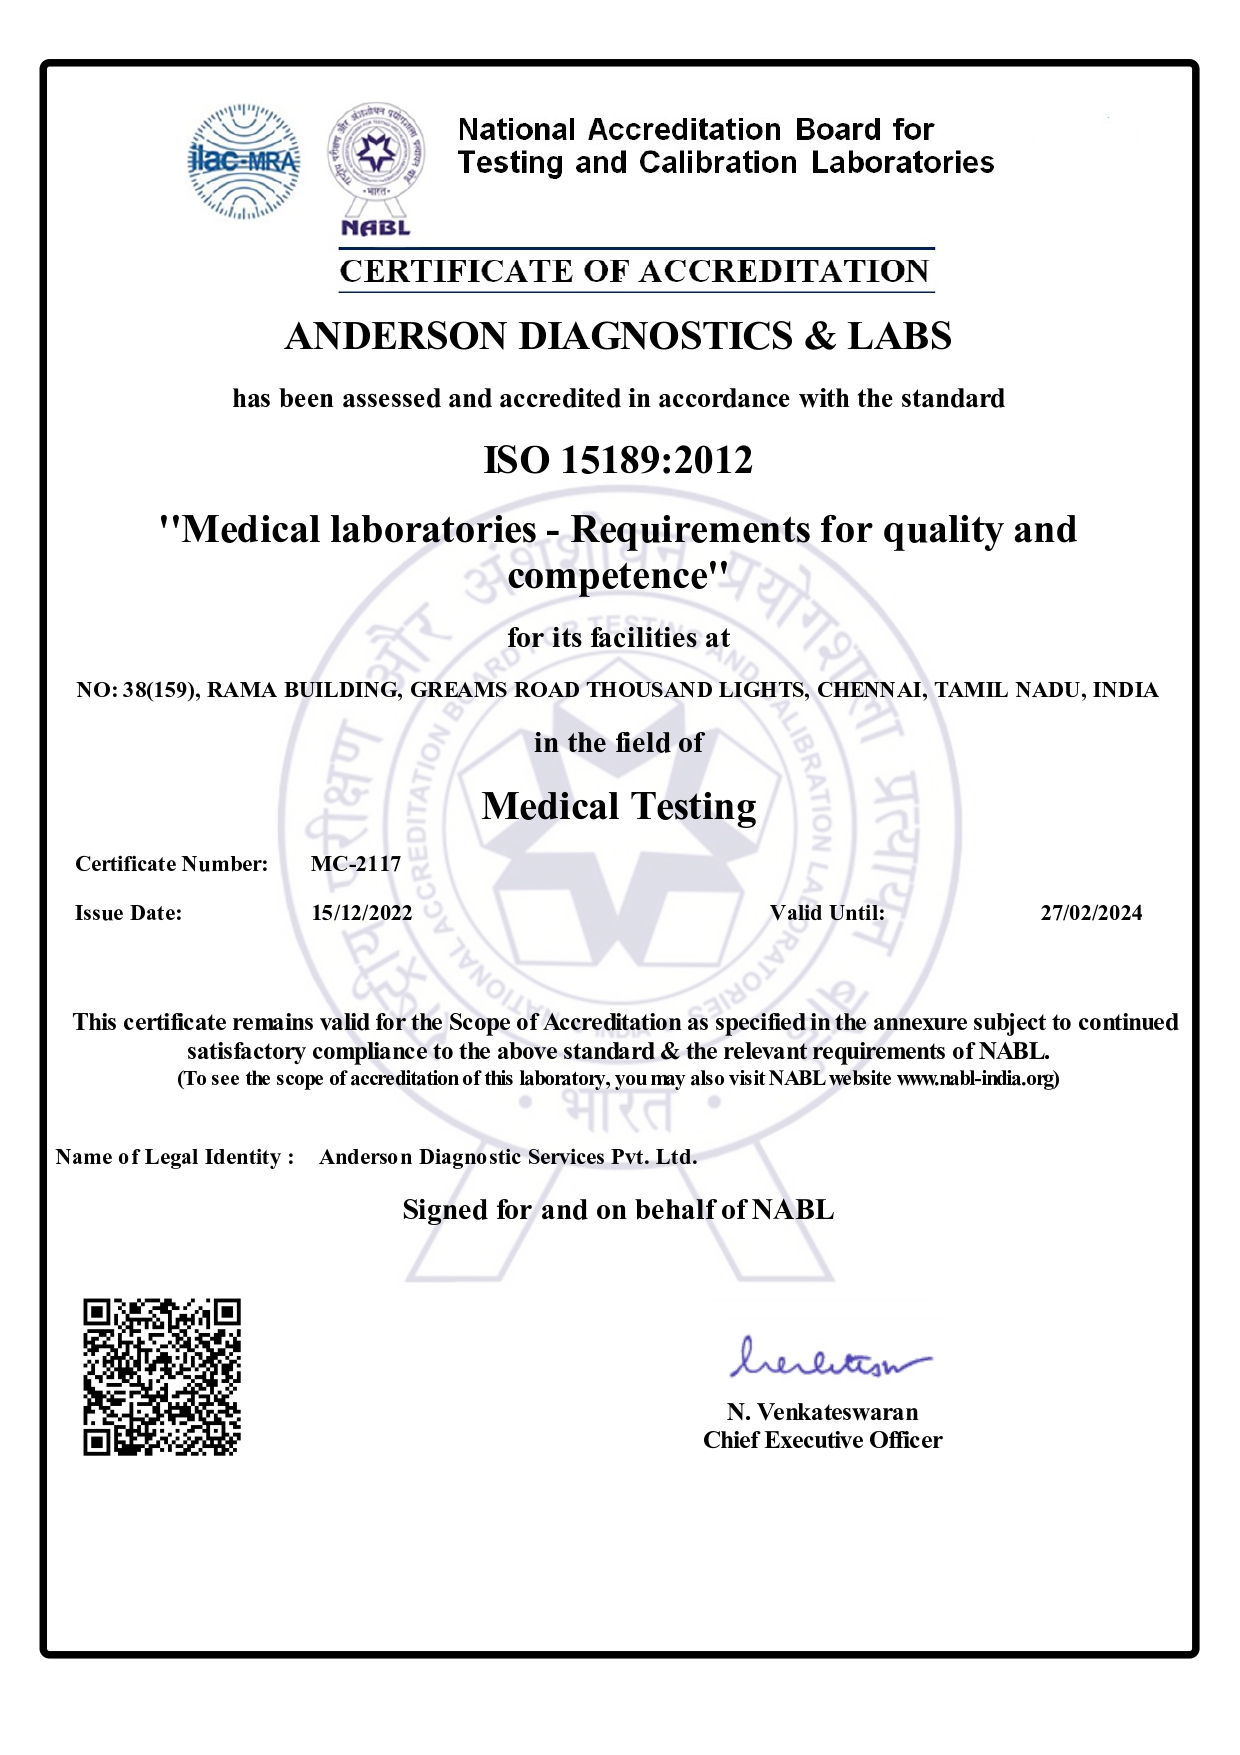 certificate for providing diagnostics services in medical imaging and clinical laboratory